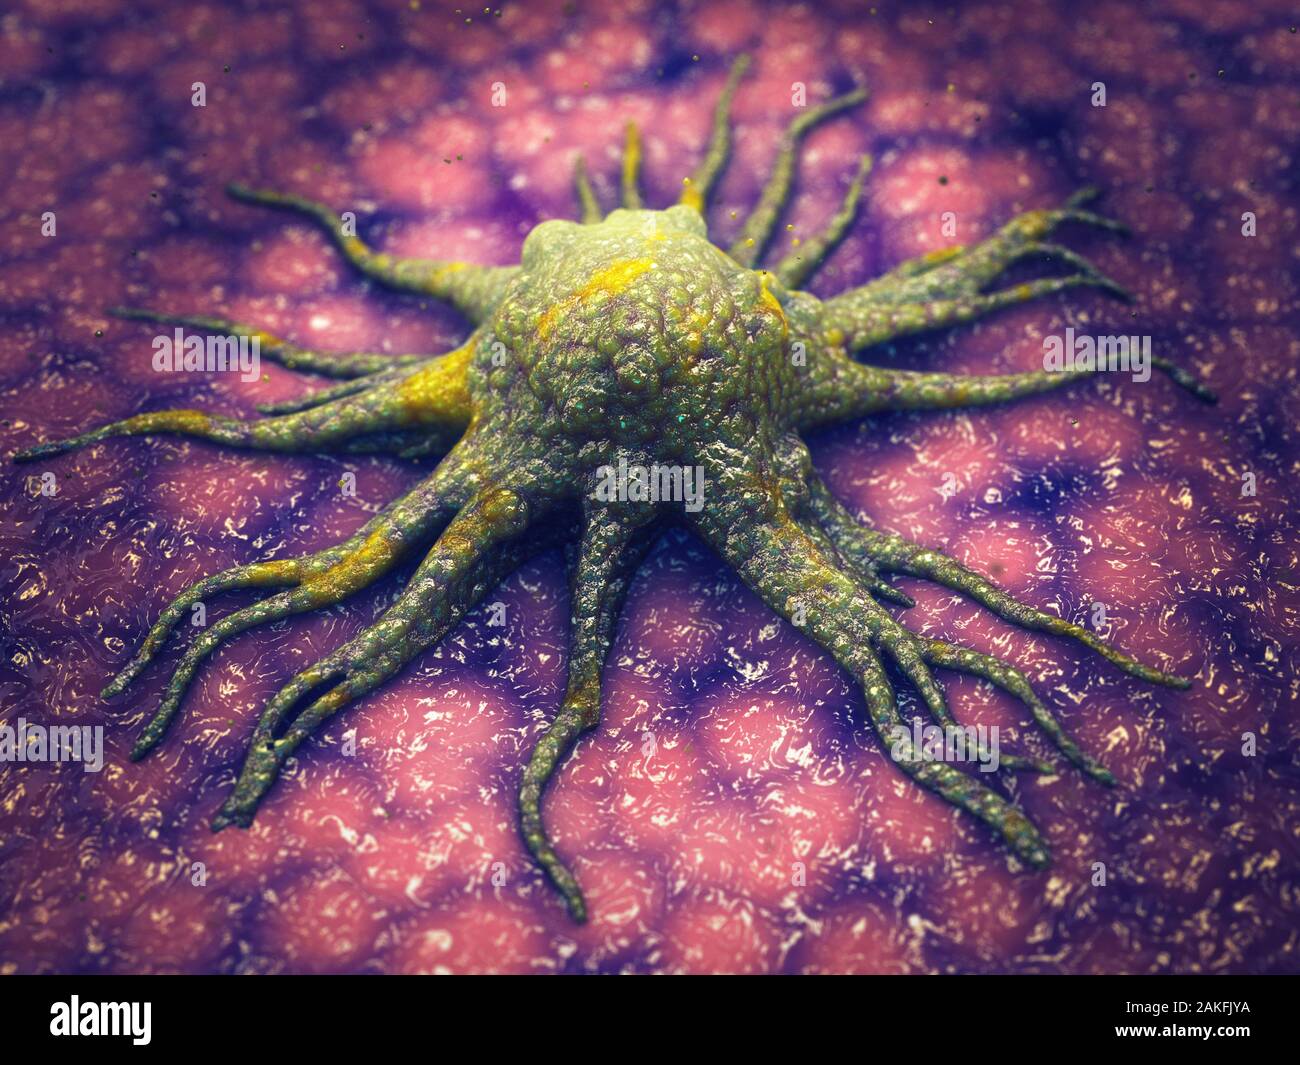 Cancer cell invading tissue, Cancer metastasis is the spreading of malignant cells  to other parts of the body, 3d illustration Stock Photo